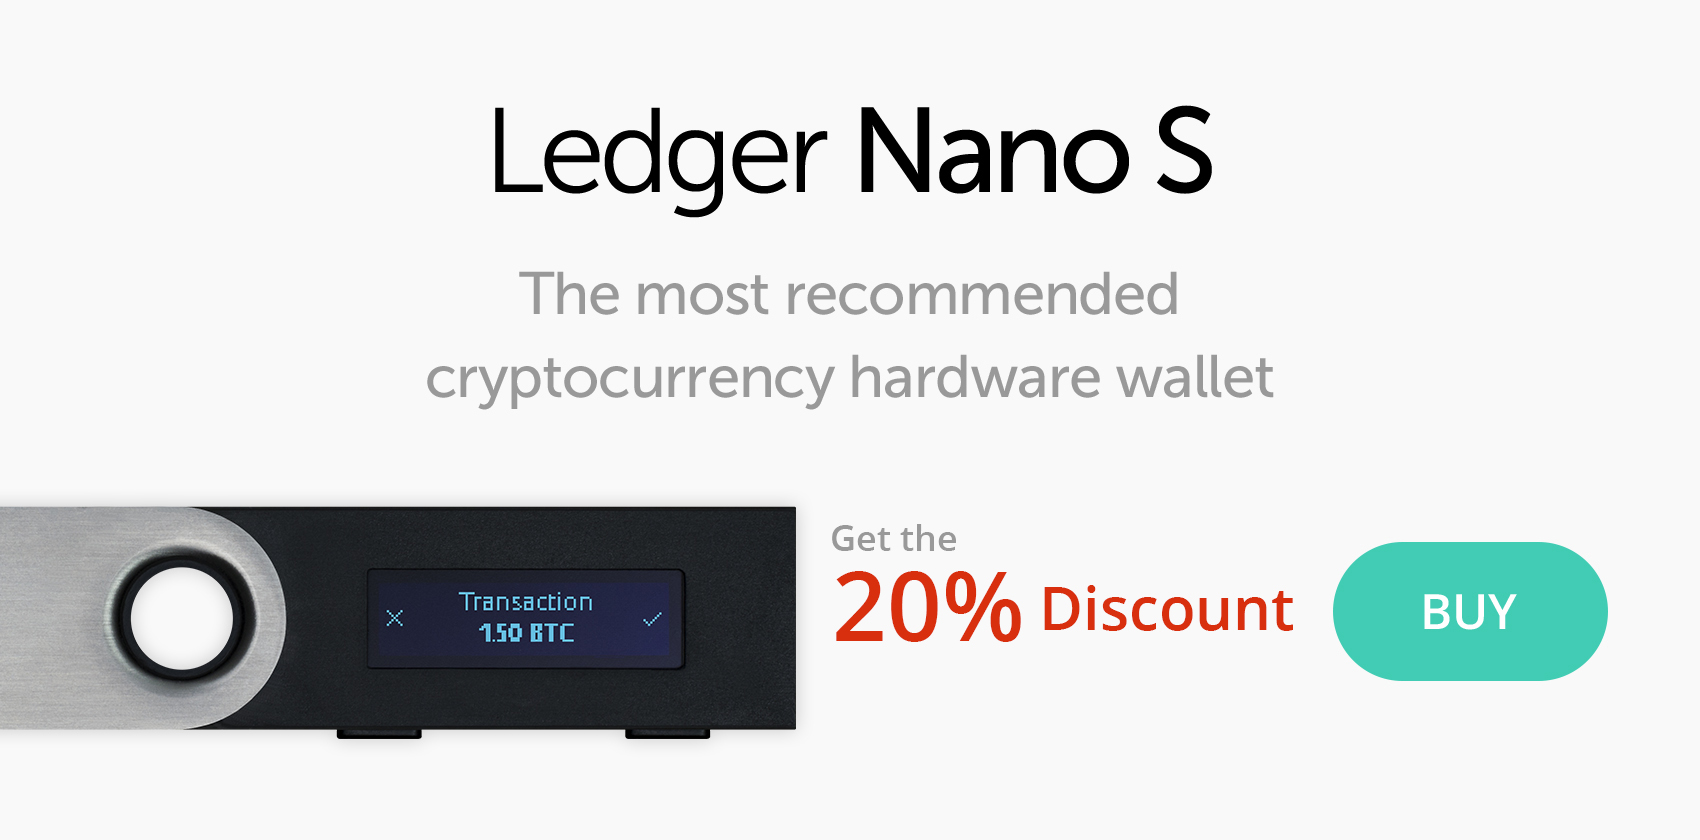 Crypto Ledger Nano S Currencies How Much It Cost To Buy Bitcoin - 